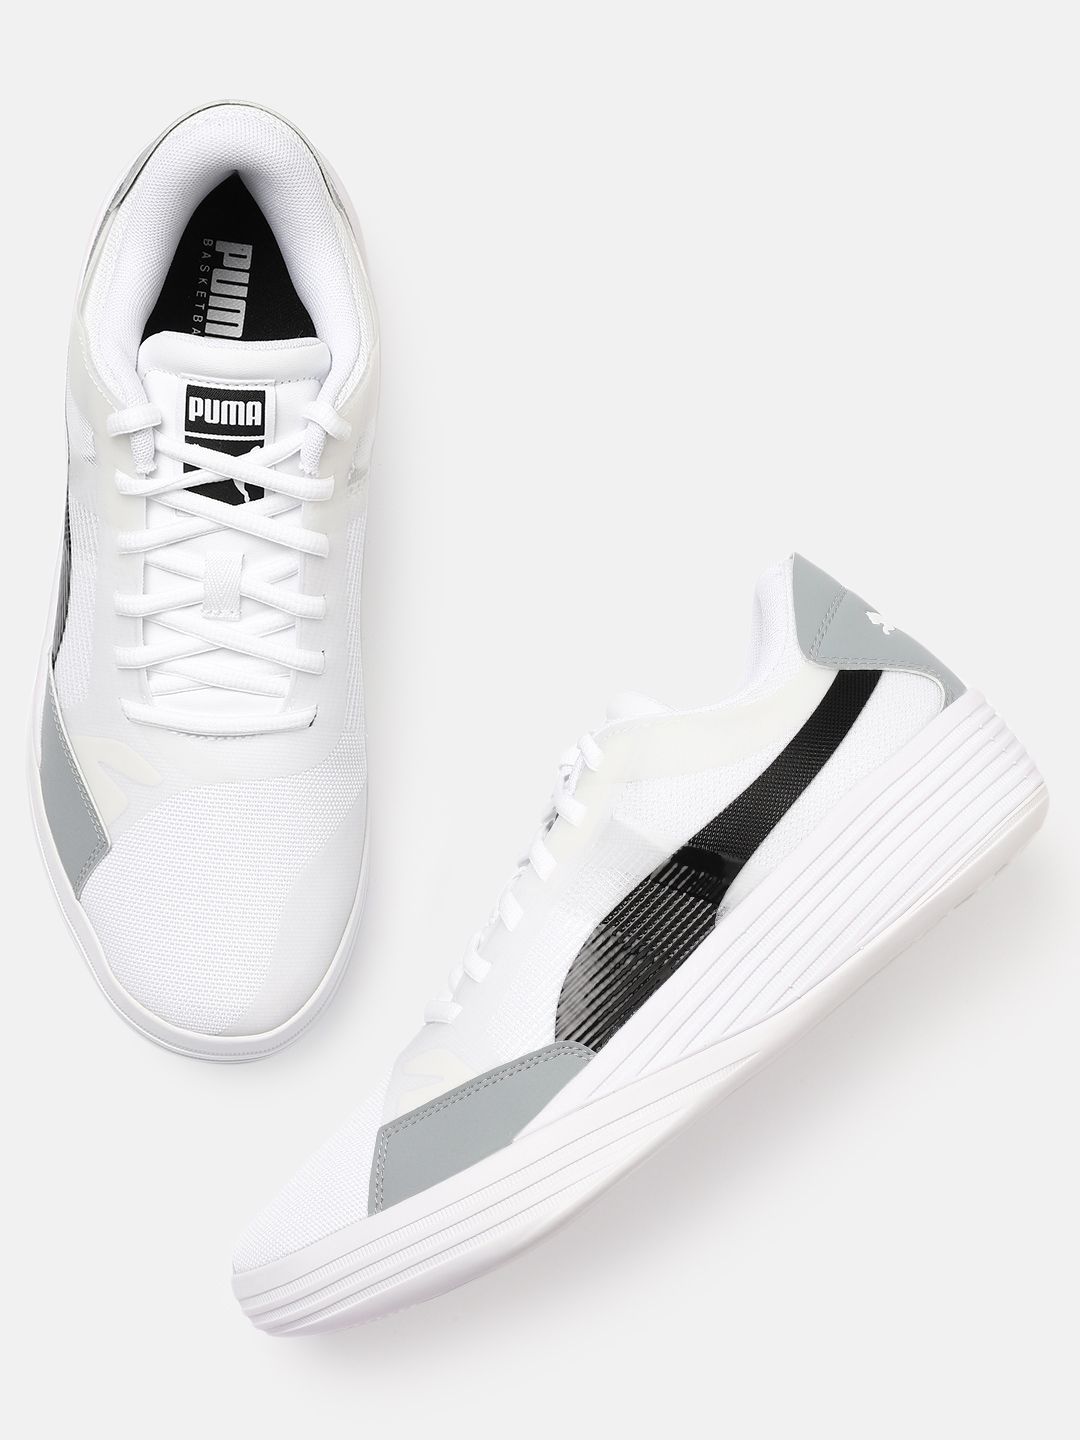 PUMA Hoops Unisex White Clyde All-Pro Team Basketball Shoes Price in India